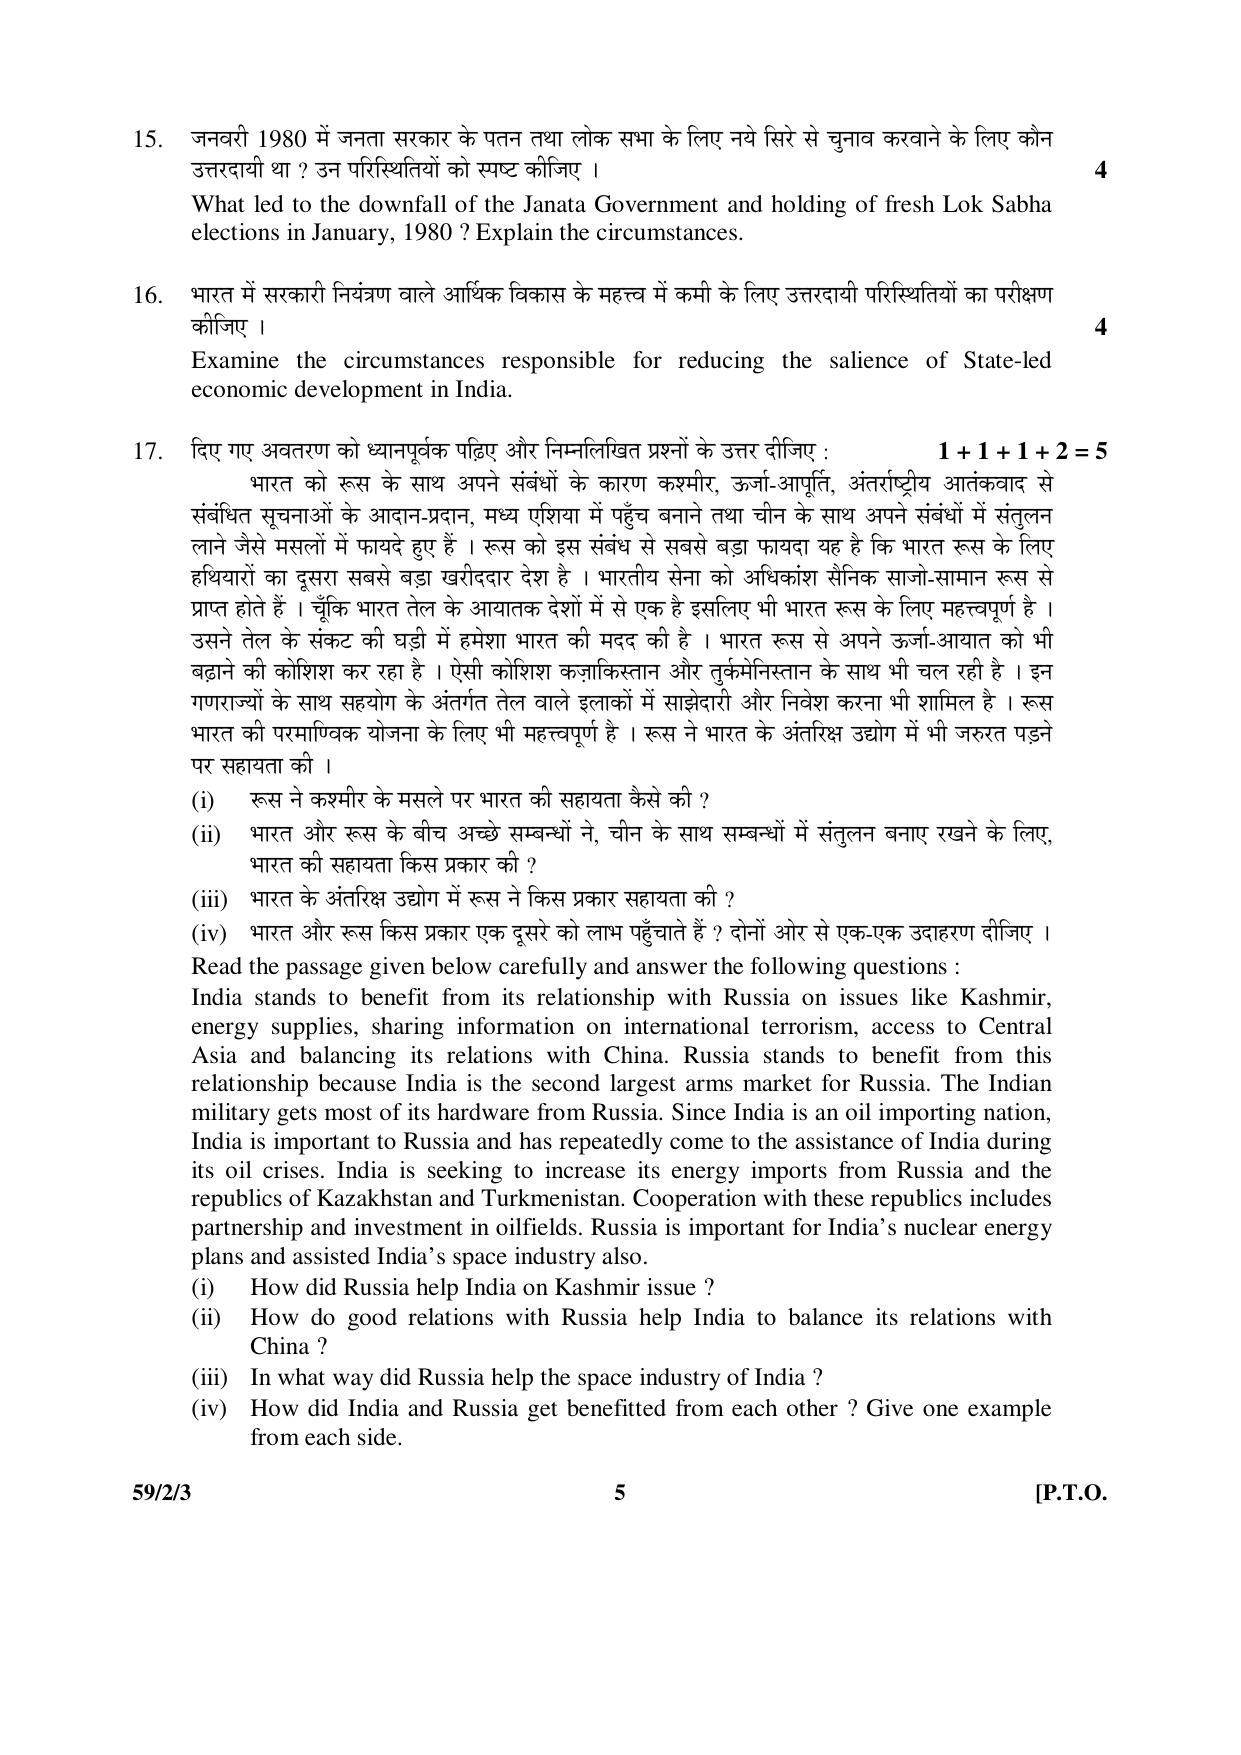 CBSE Class 12 59-2-3 _Political Science 2016 Question Paper - Page 5